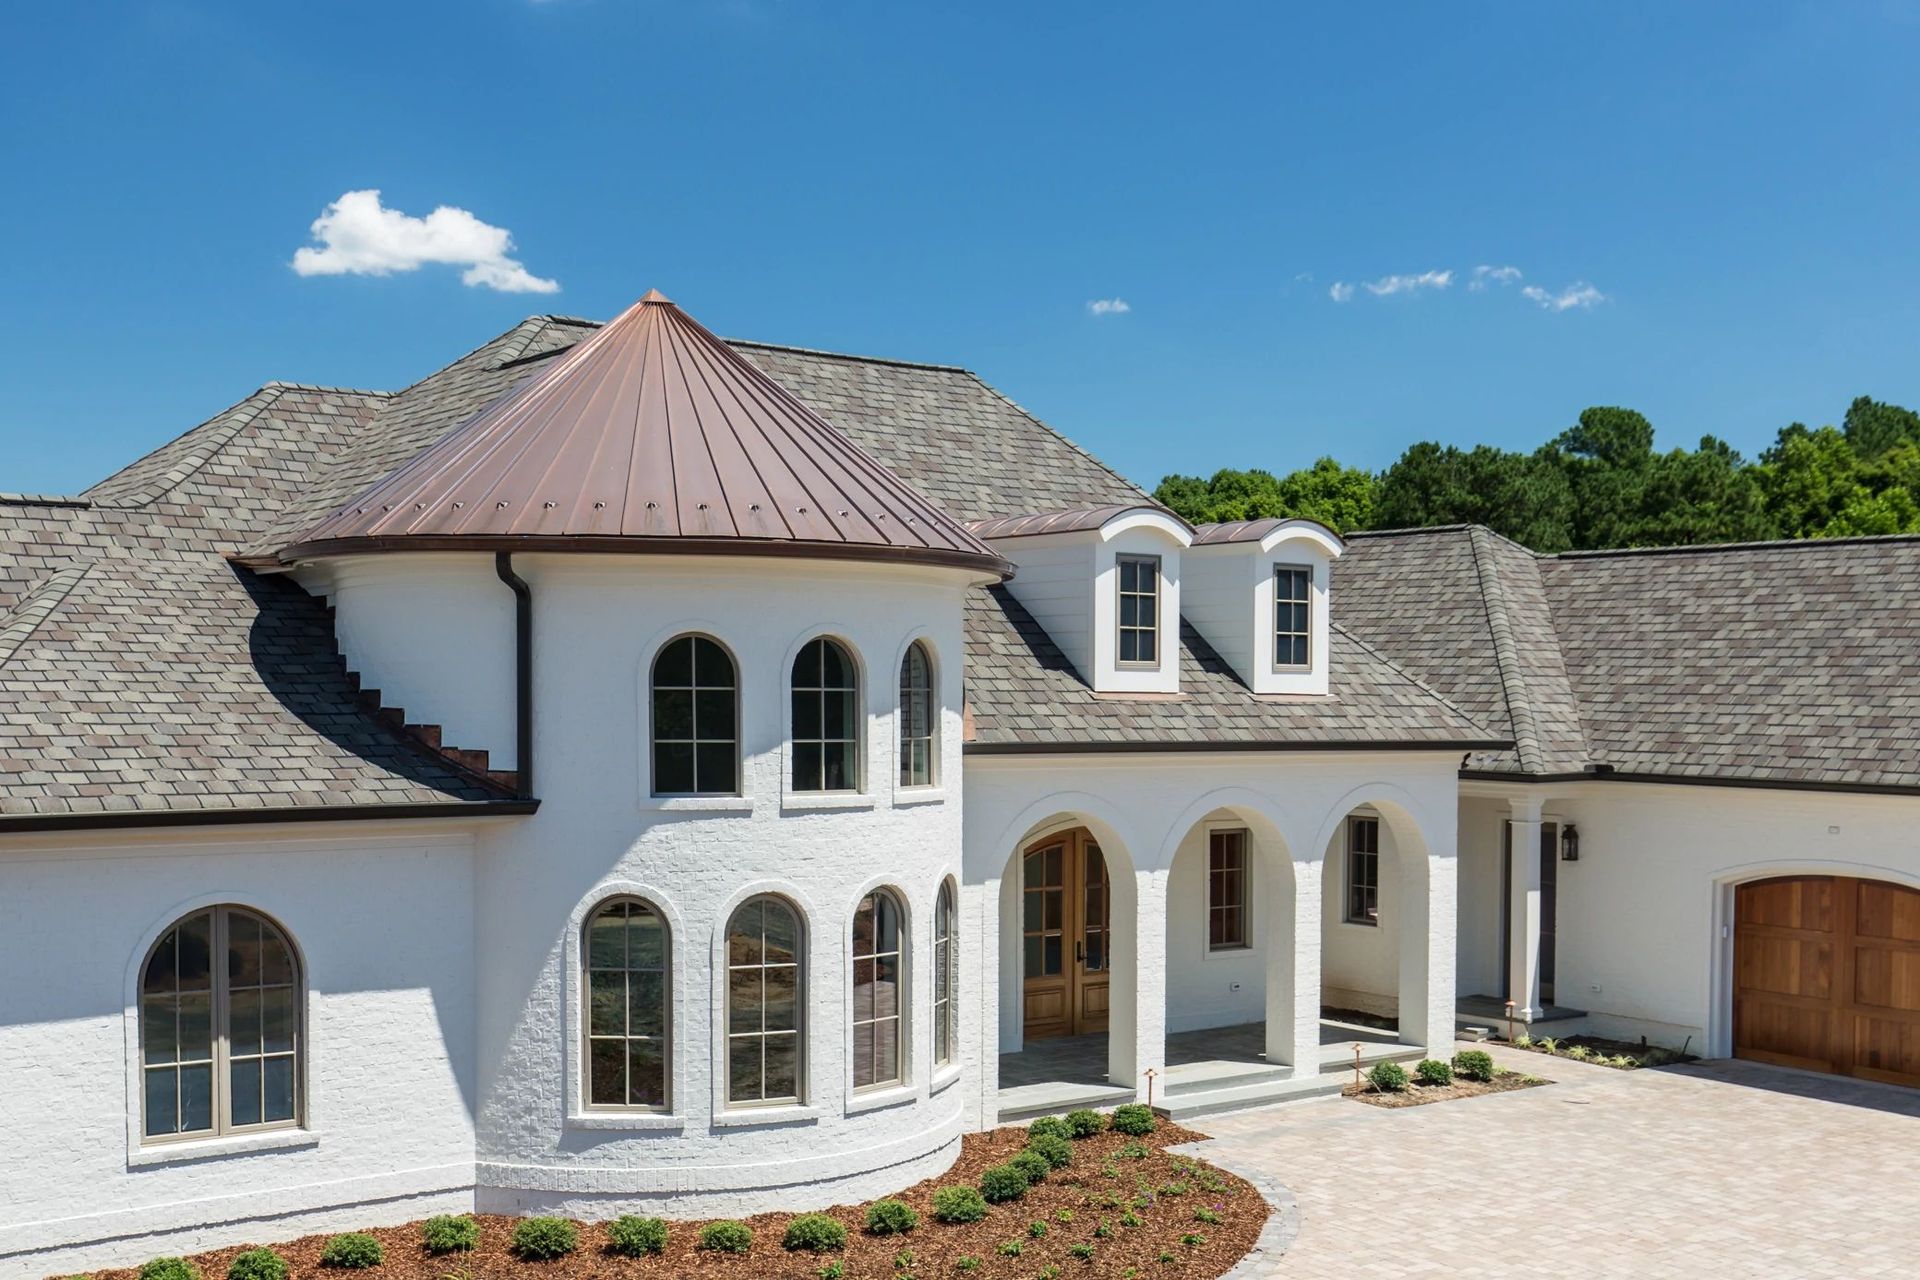 What Roof Material Is Best For My Home? Read Our Guide to Roofing Materials